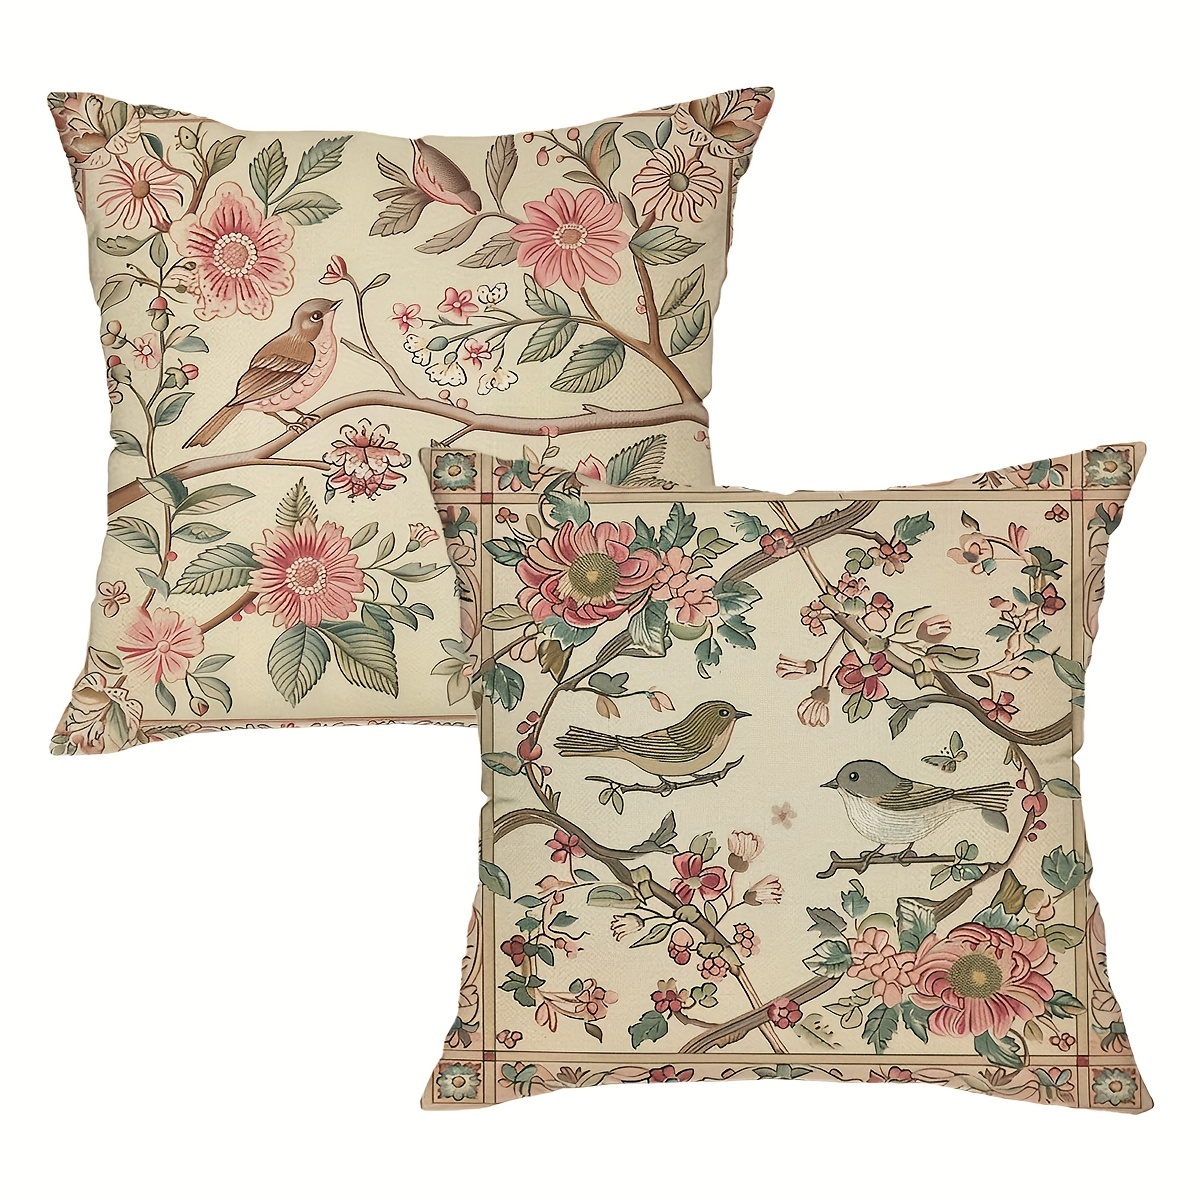 

Chinoiserie Floral & Birds 2-piece Throw Pillow Covers, 18x18 Inch - Linen Blend, Zip Closure, Hand Wash Only - Perfect For Sofa, Bedroom, Office, And Farmhouse Decor